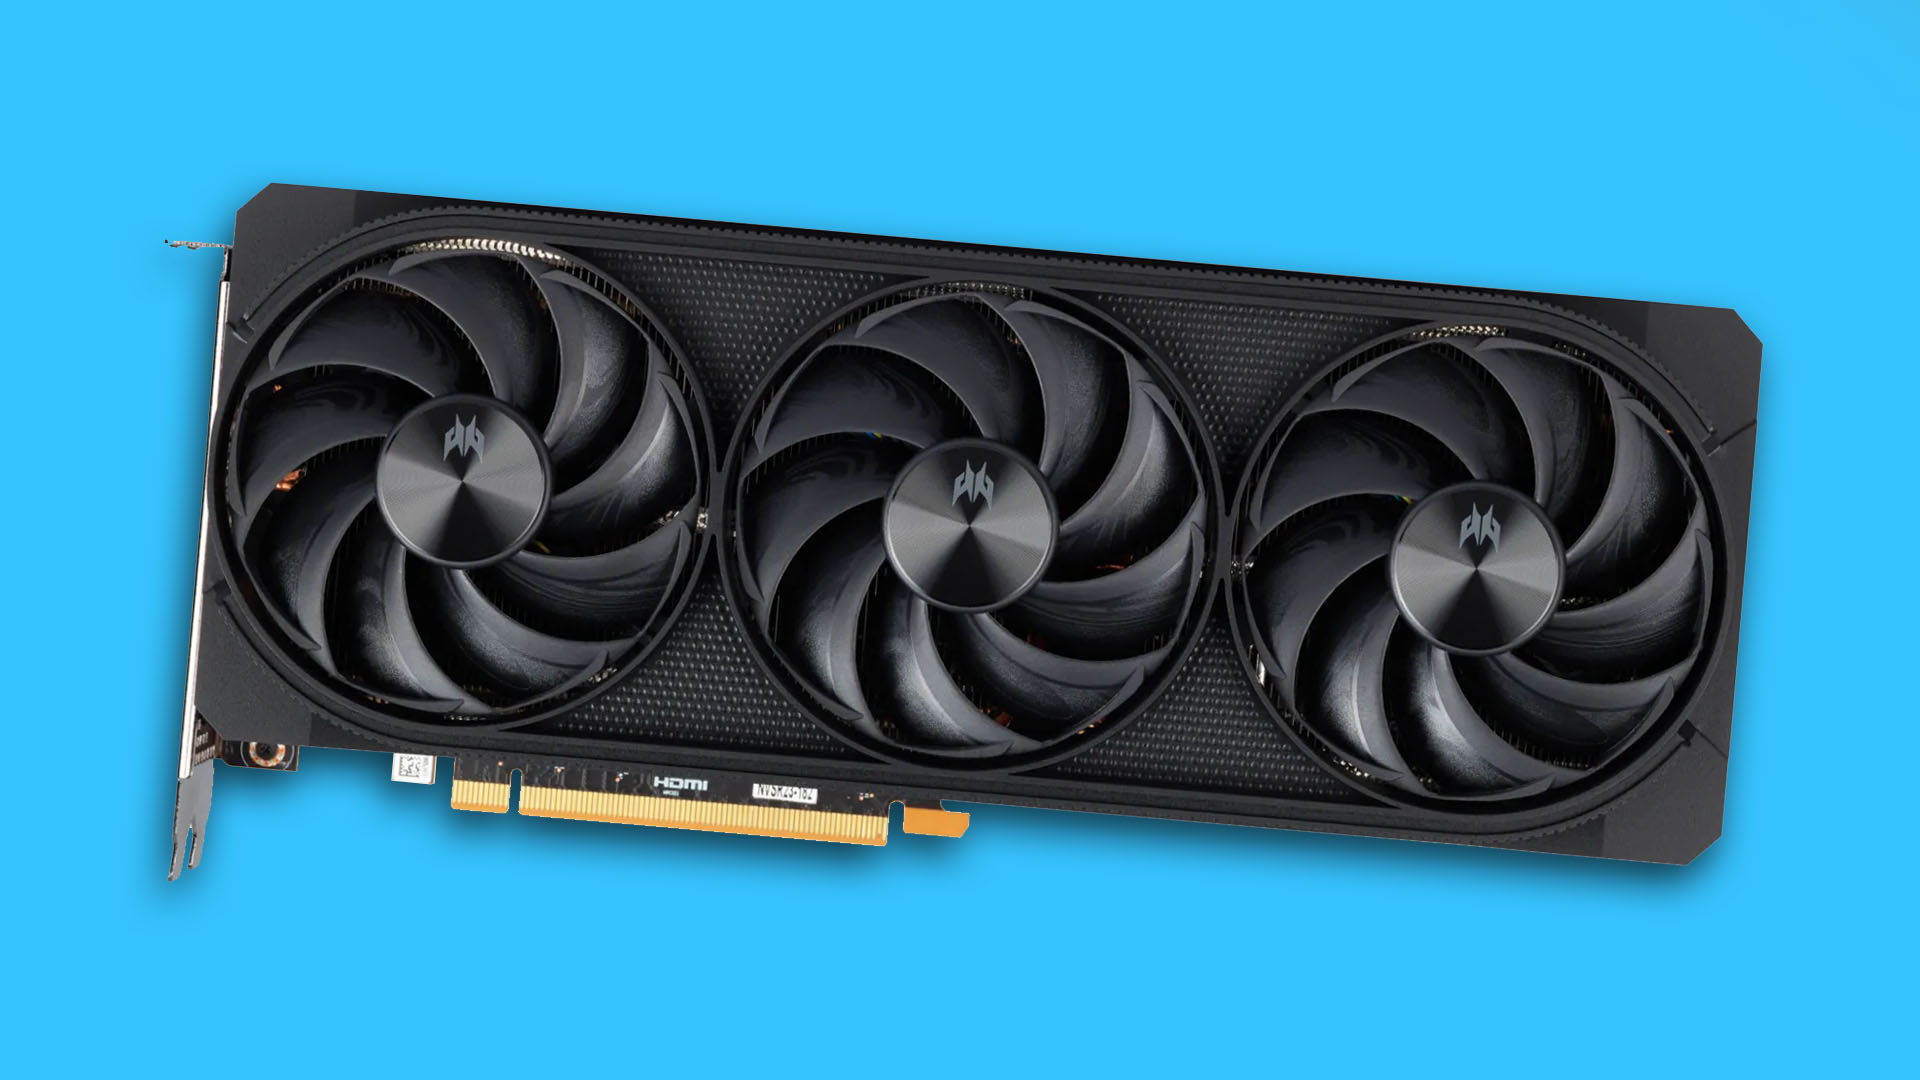 Acer graphics cards finally got interesting, thanks to two new GPUs